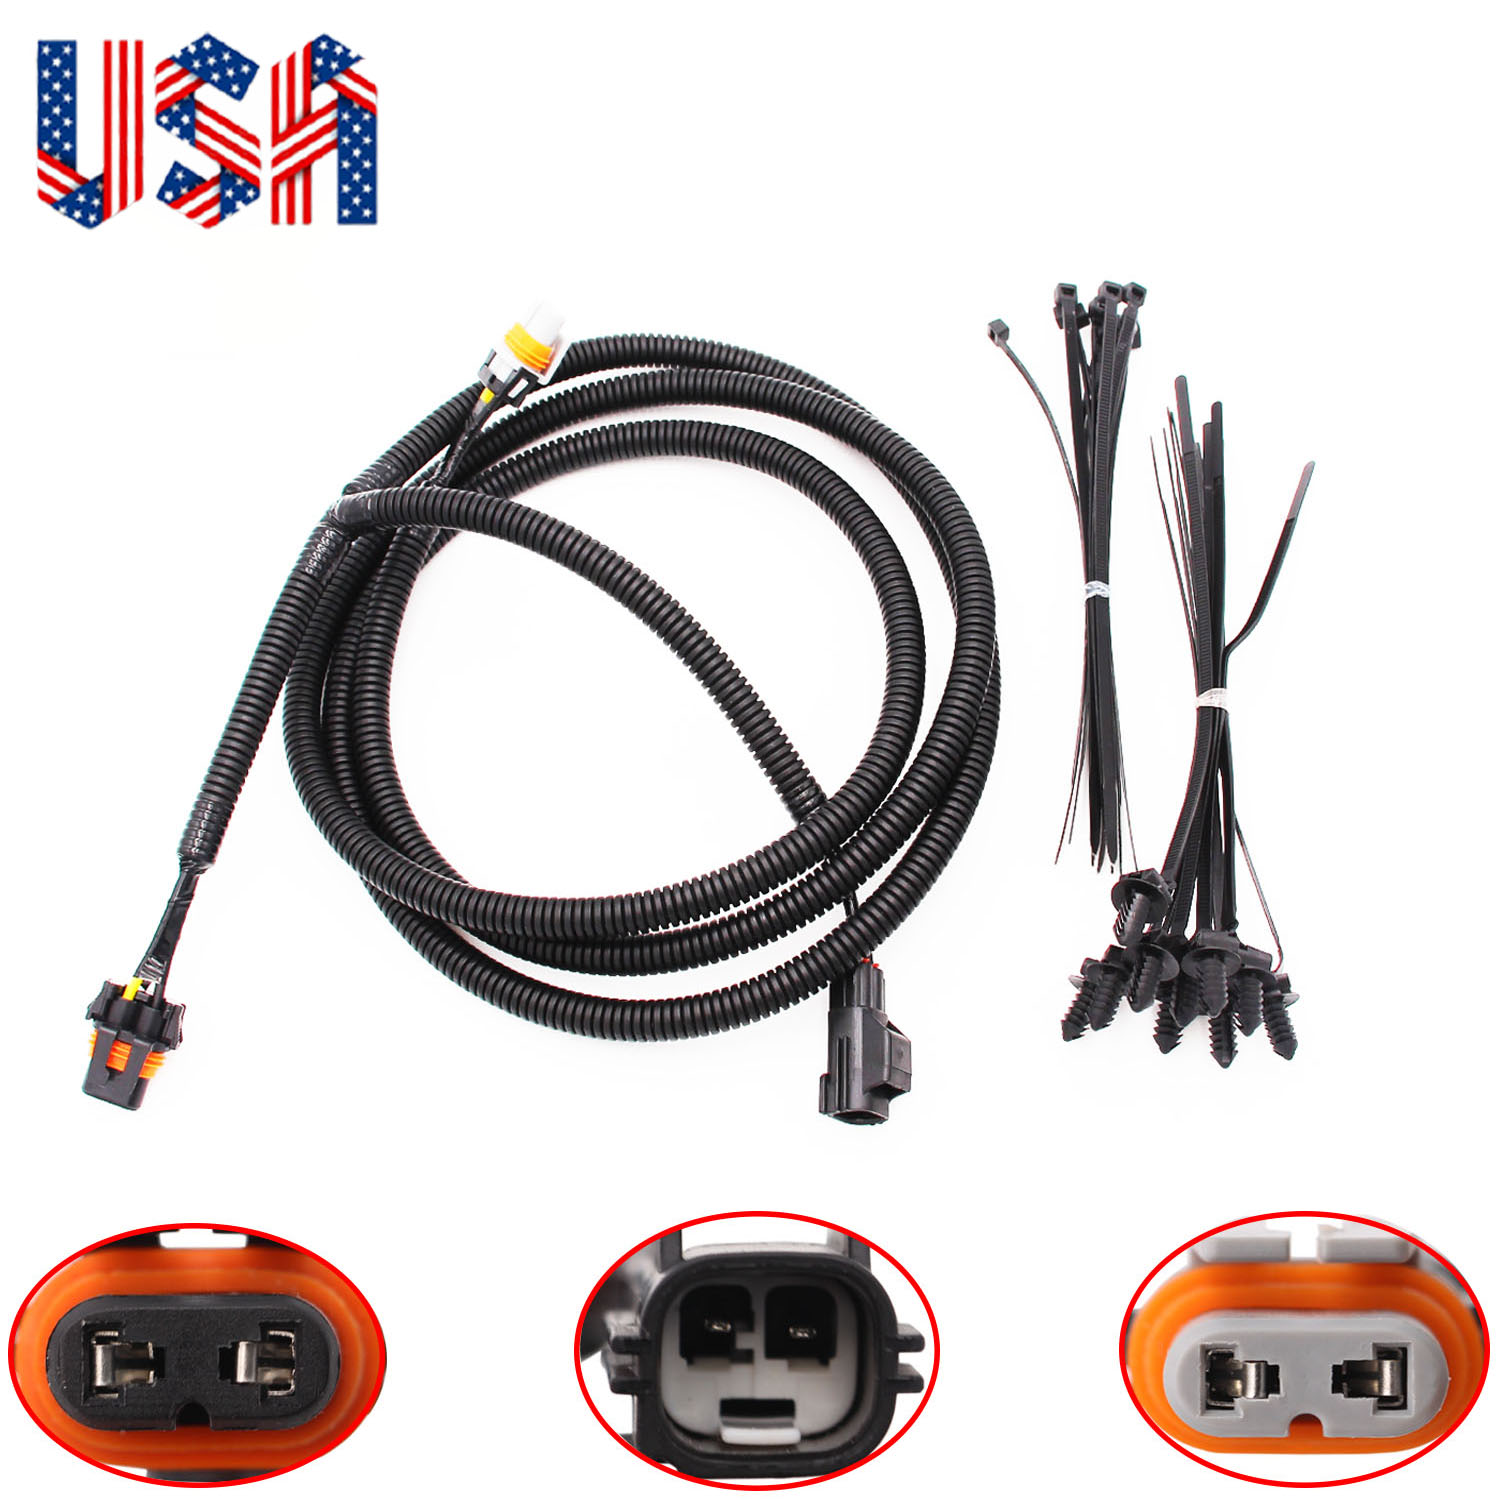 Fog Lamp Jumper Wiring Harness 56045501AC Fit for 2002-2008 Dodge Ram 1500 2500 | eBay 2008 Dodge Ram Tail Light Wiring Harness